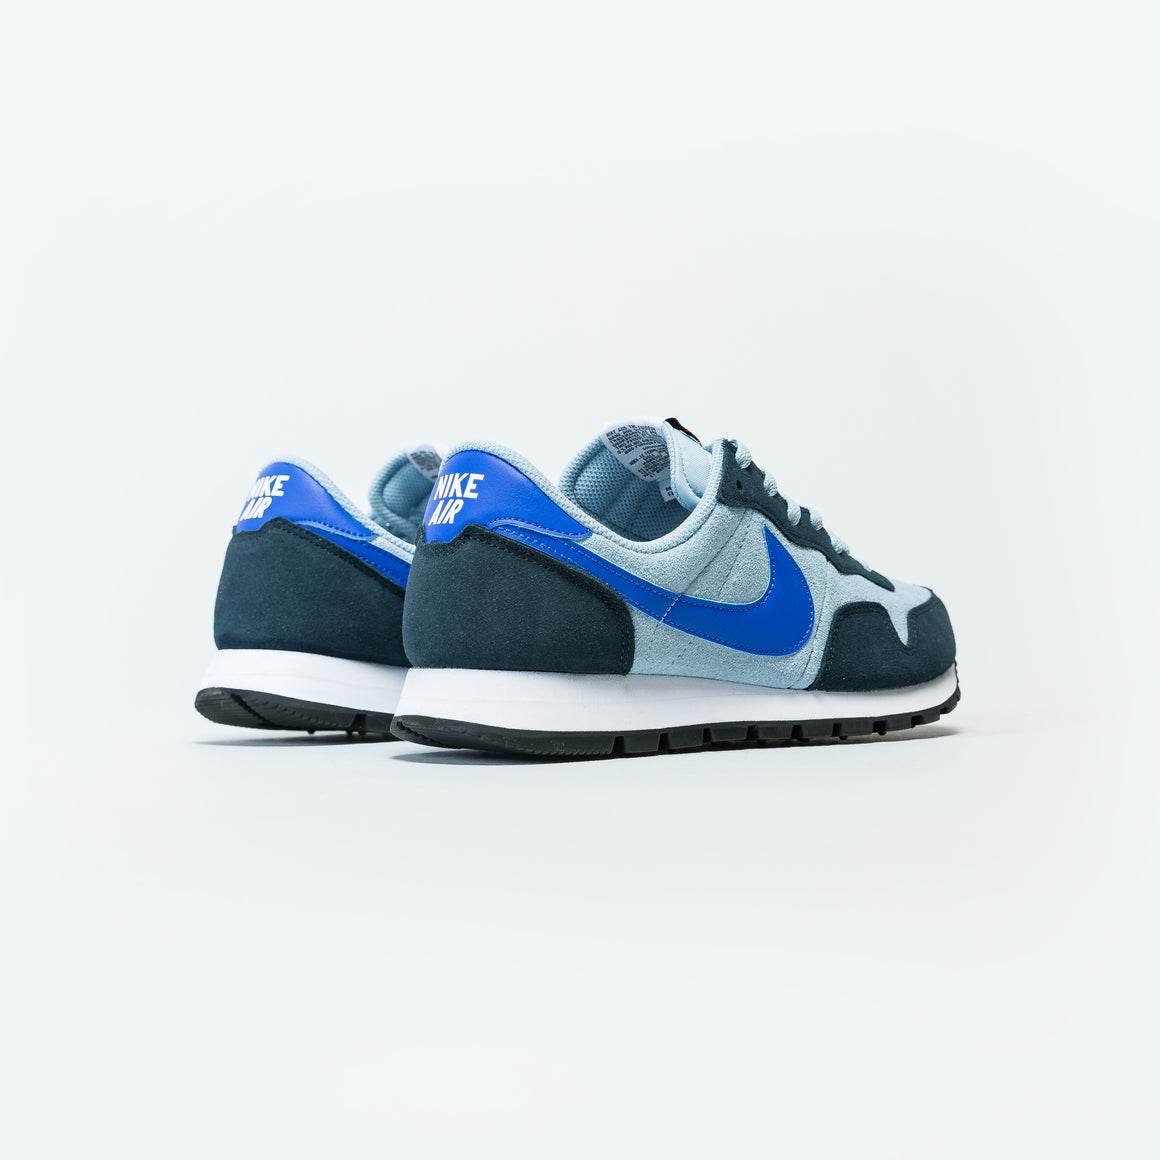 Nike - Air 83 PRM - Boarder Blue/Racer Blue-Armory Navy | Up There